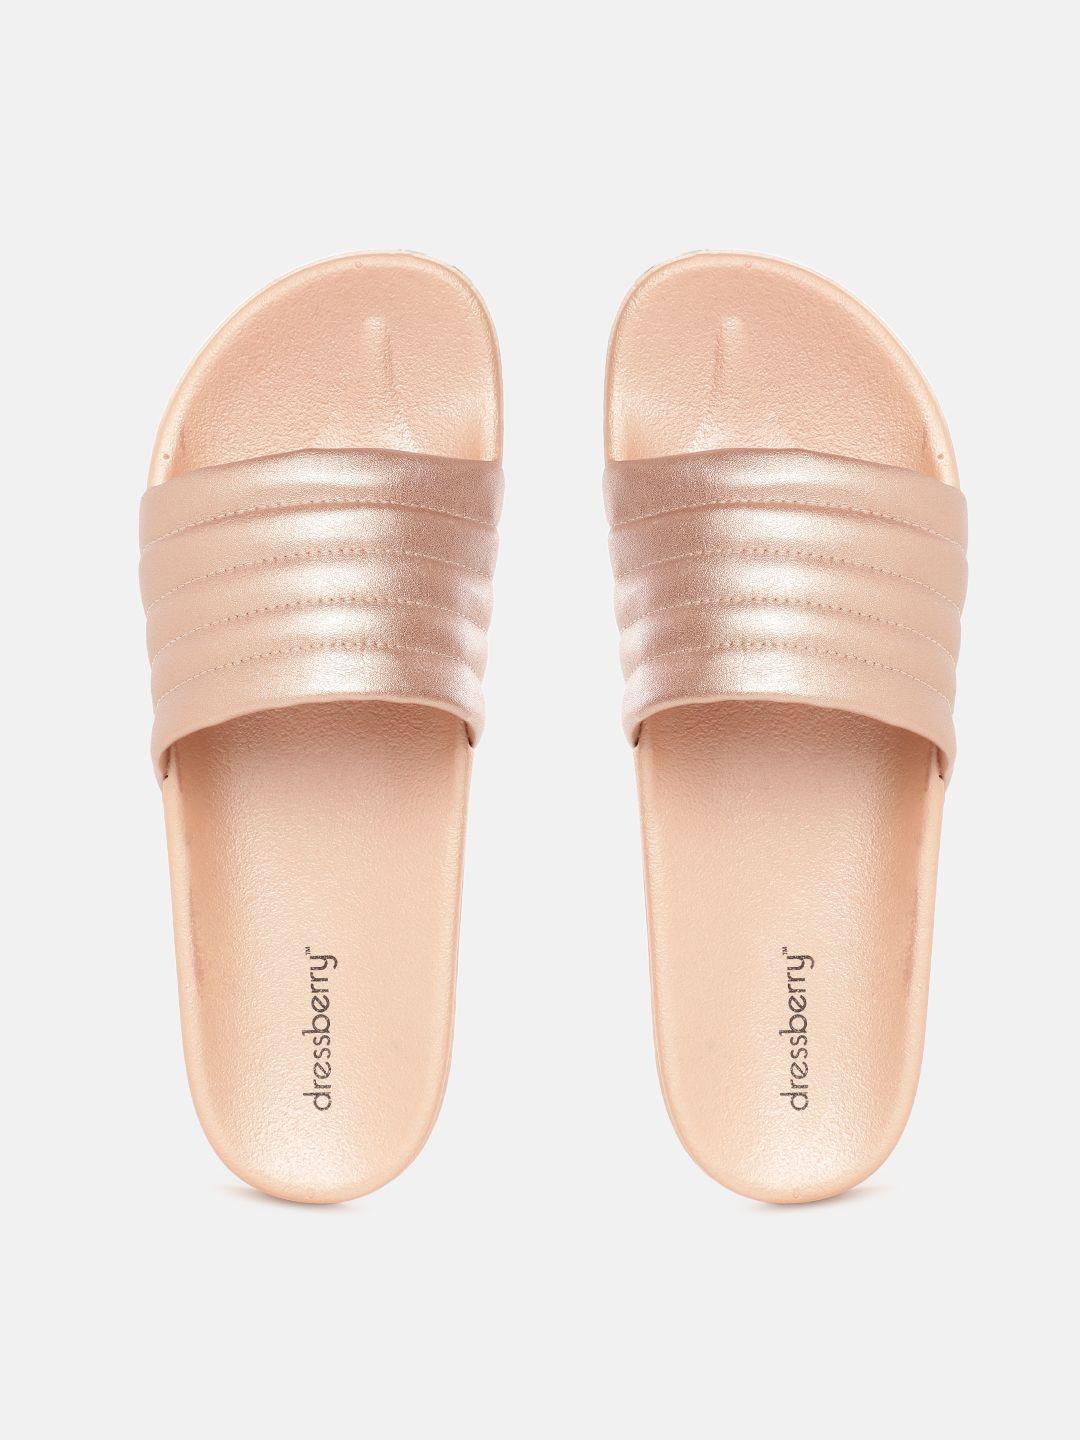 dressberry-women-rose-gold-toned-quilted-sliders